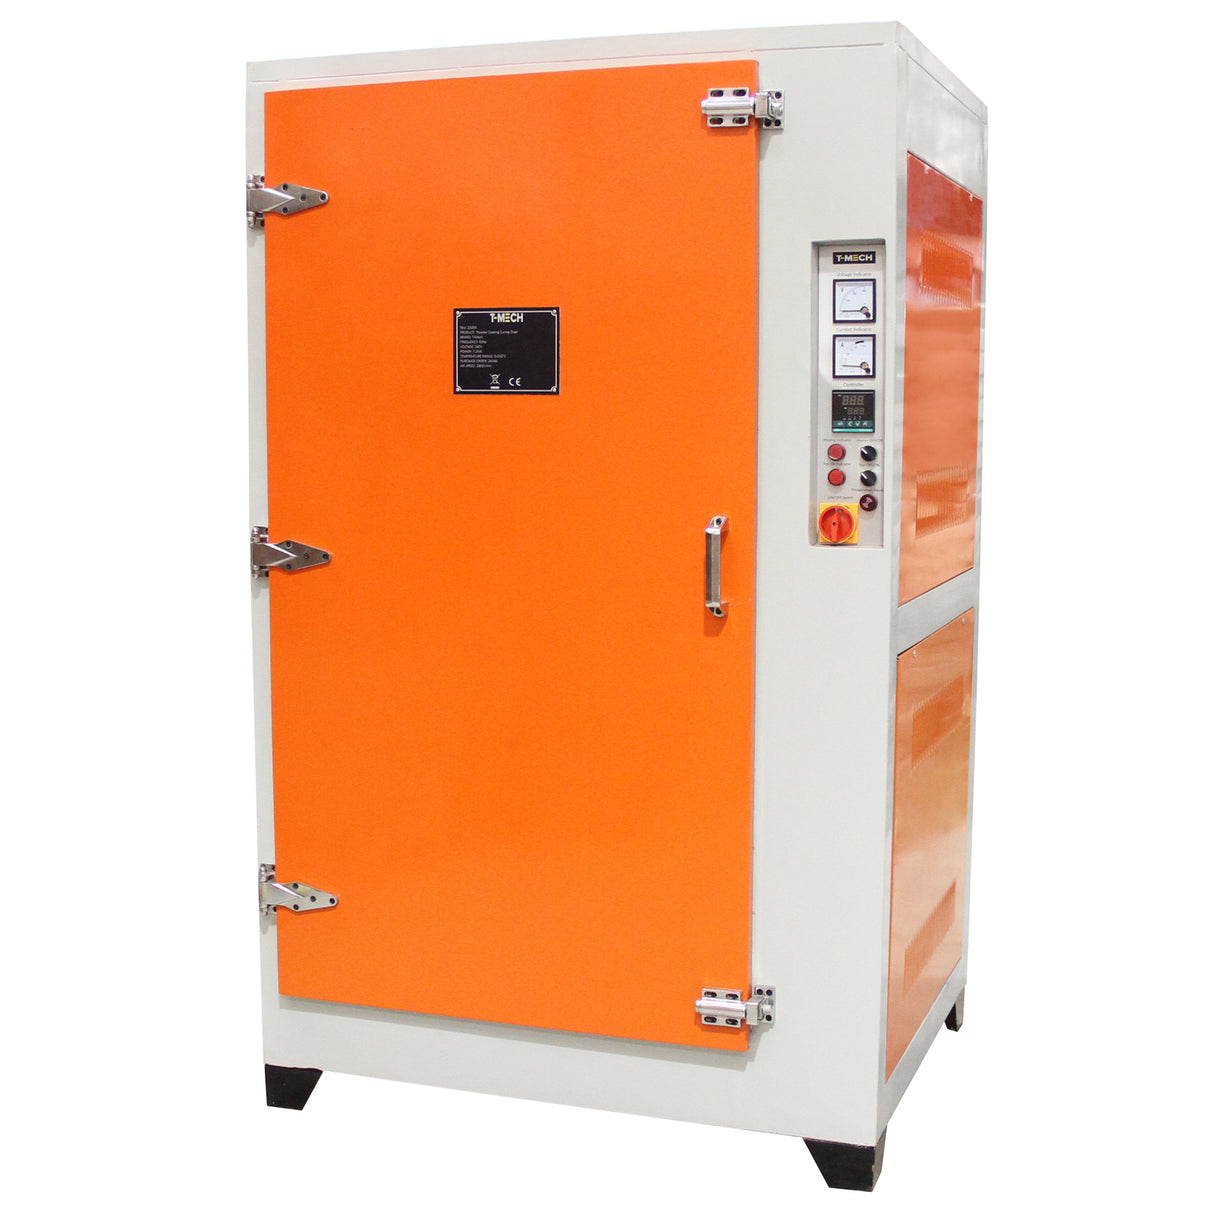 T-Mech Powder Coating Curing Oven